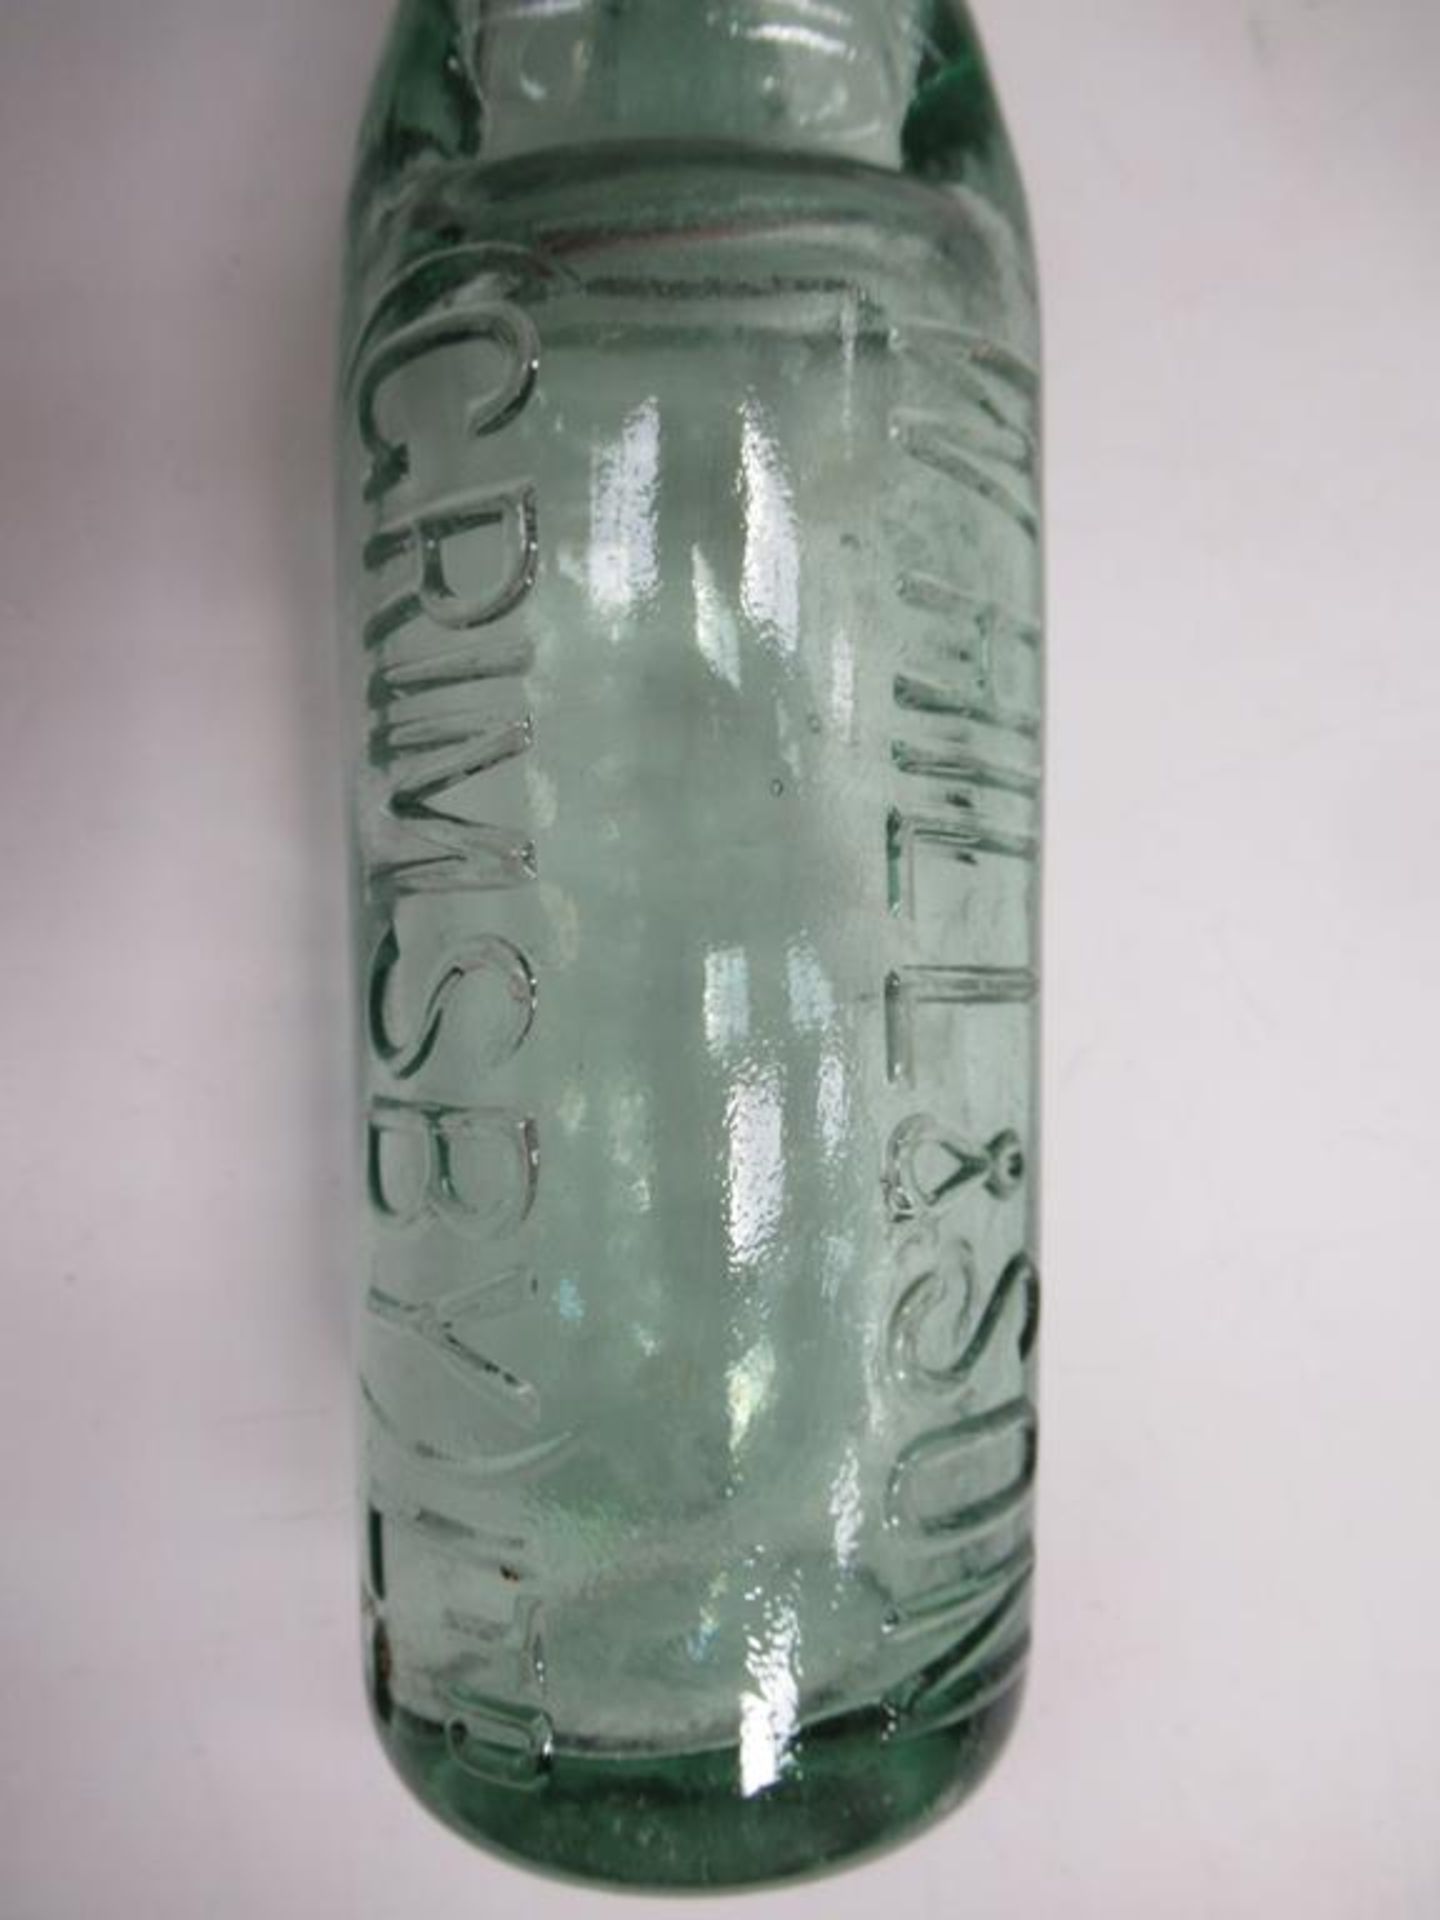 6x Grimsby W.M Hill & Co (4) and W. Hill & Son (2) Codd bottles - Image 9 of 21